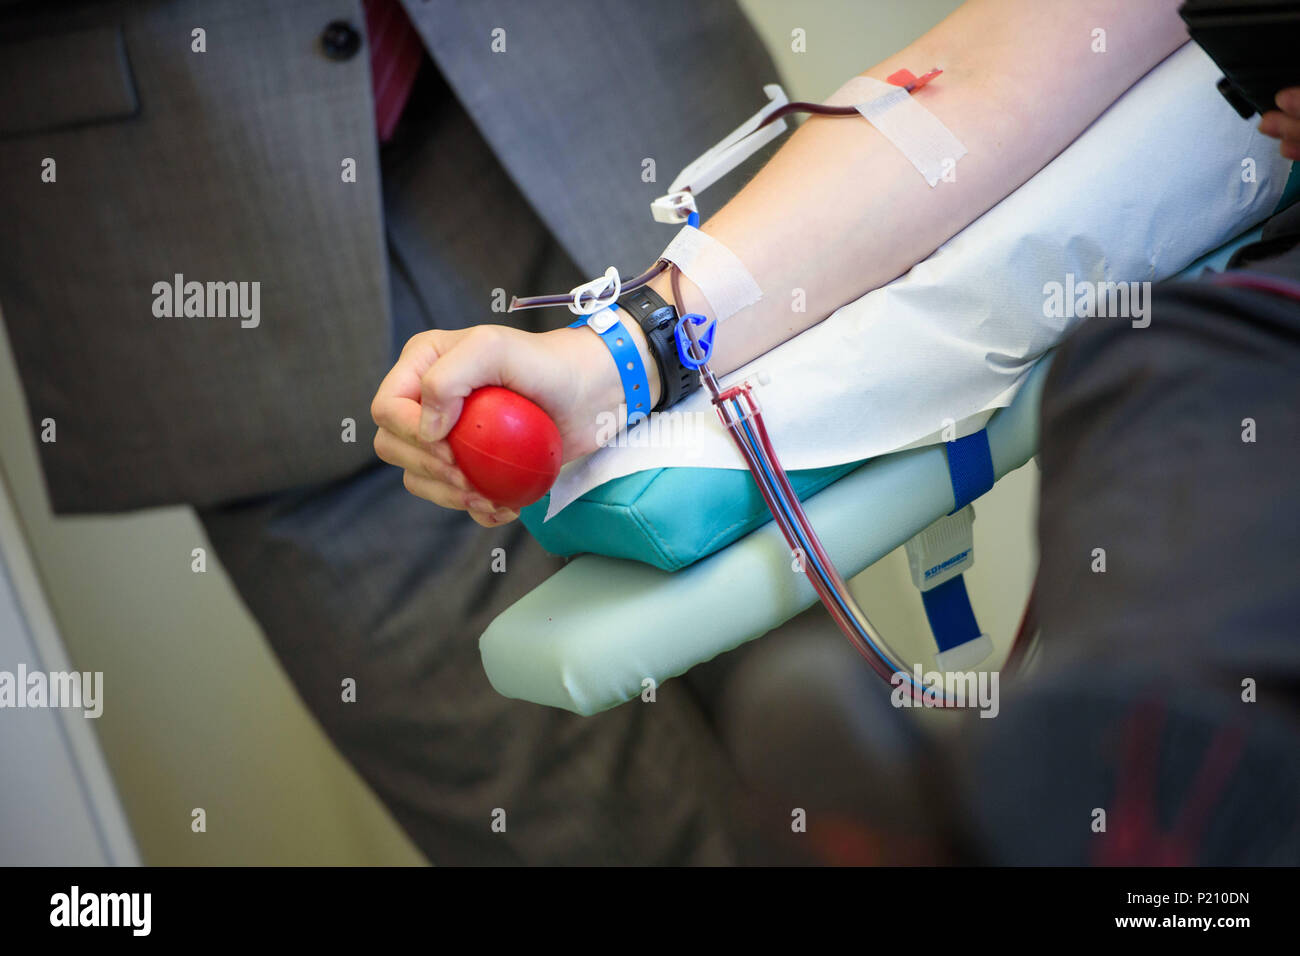 13 June 2018, Germany, Berlin: The arm of a patient during a platelet donation at the Charite hospital. The World Blood Donor Day is held on the 14 June which is the birthday of Karl Landsteiner, the discoverer of blood types. Photo: Gregor Fischer/dpa Stock Photo